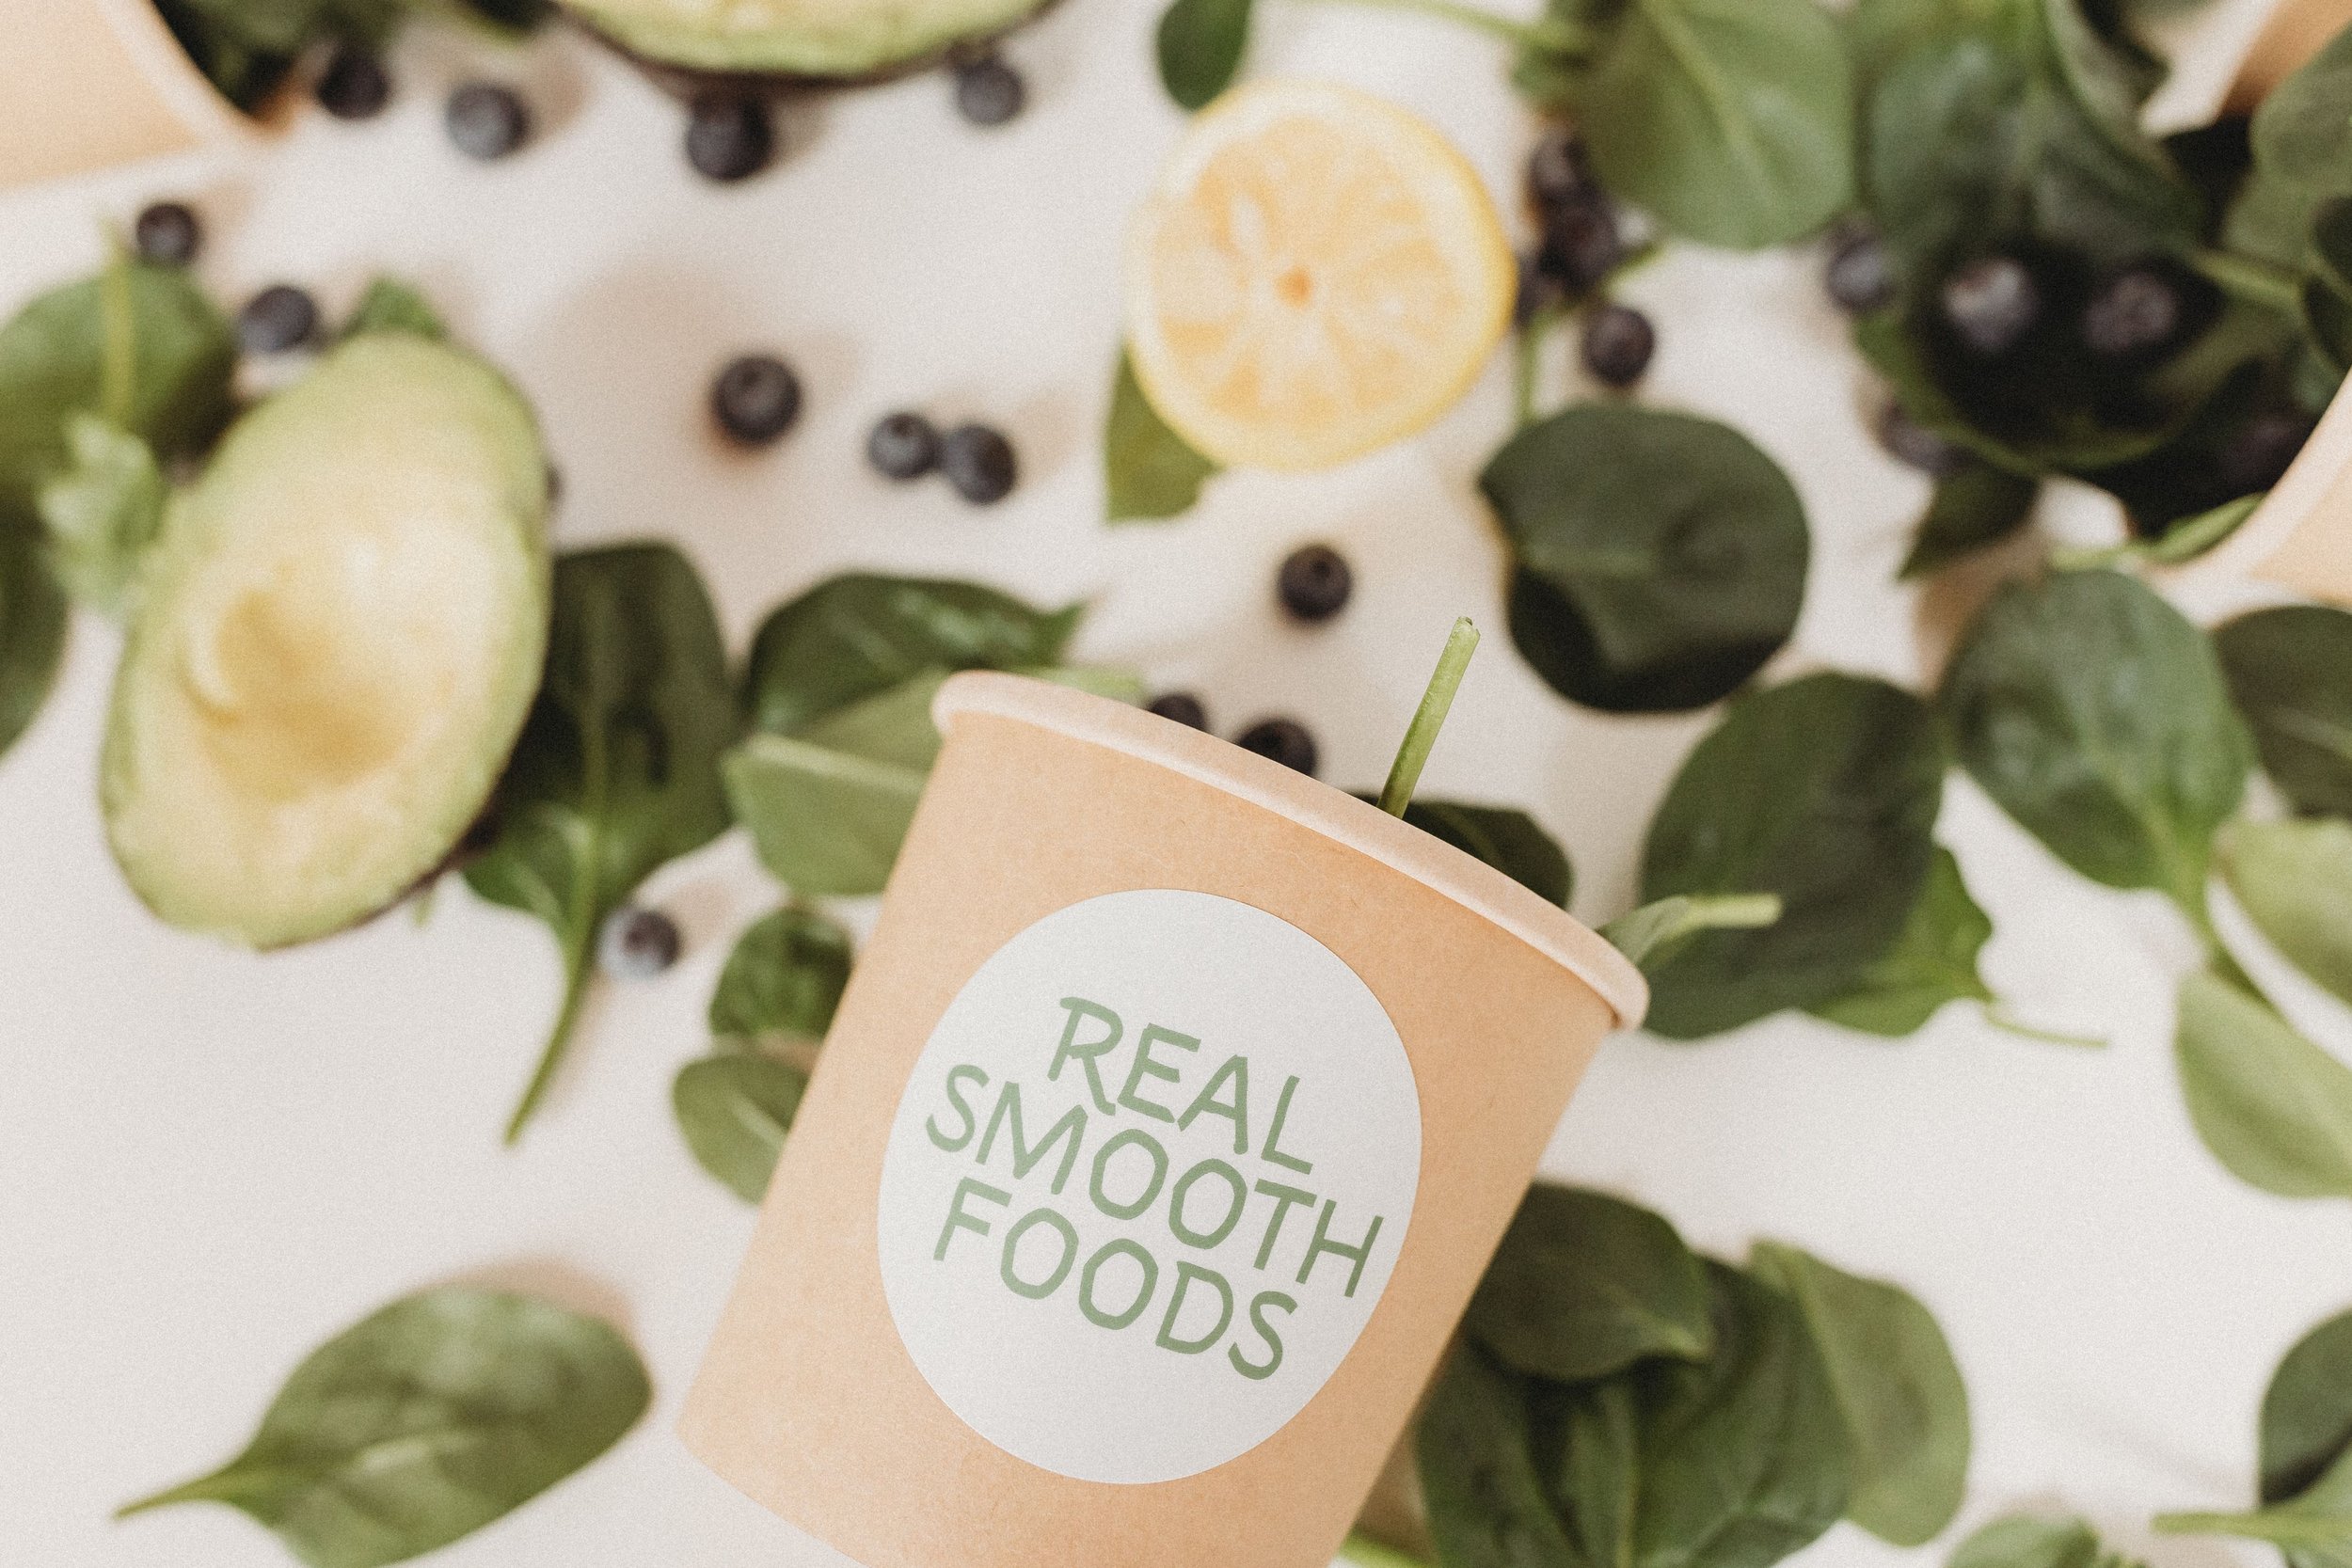  a real smooth foods cup lays out among spinach, blueberries, and an avocado 